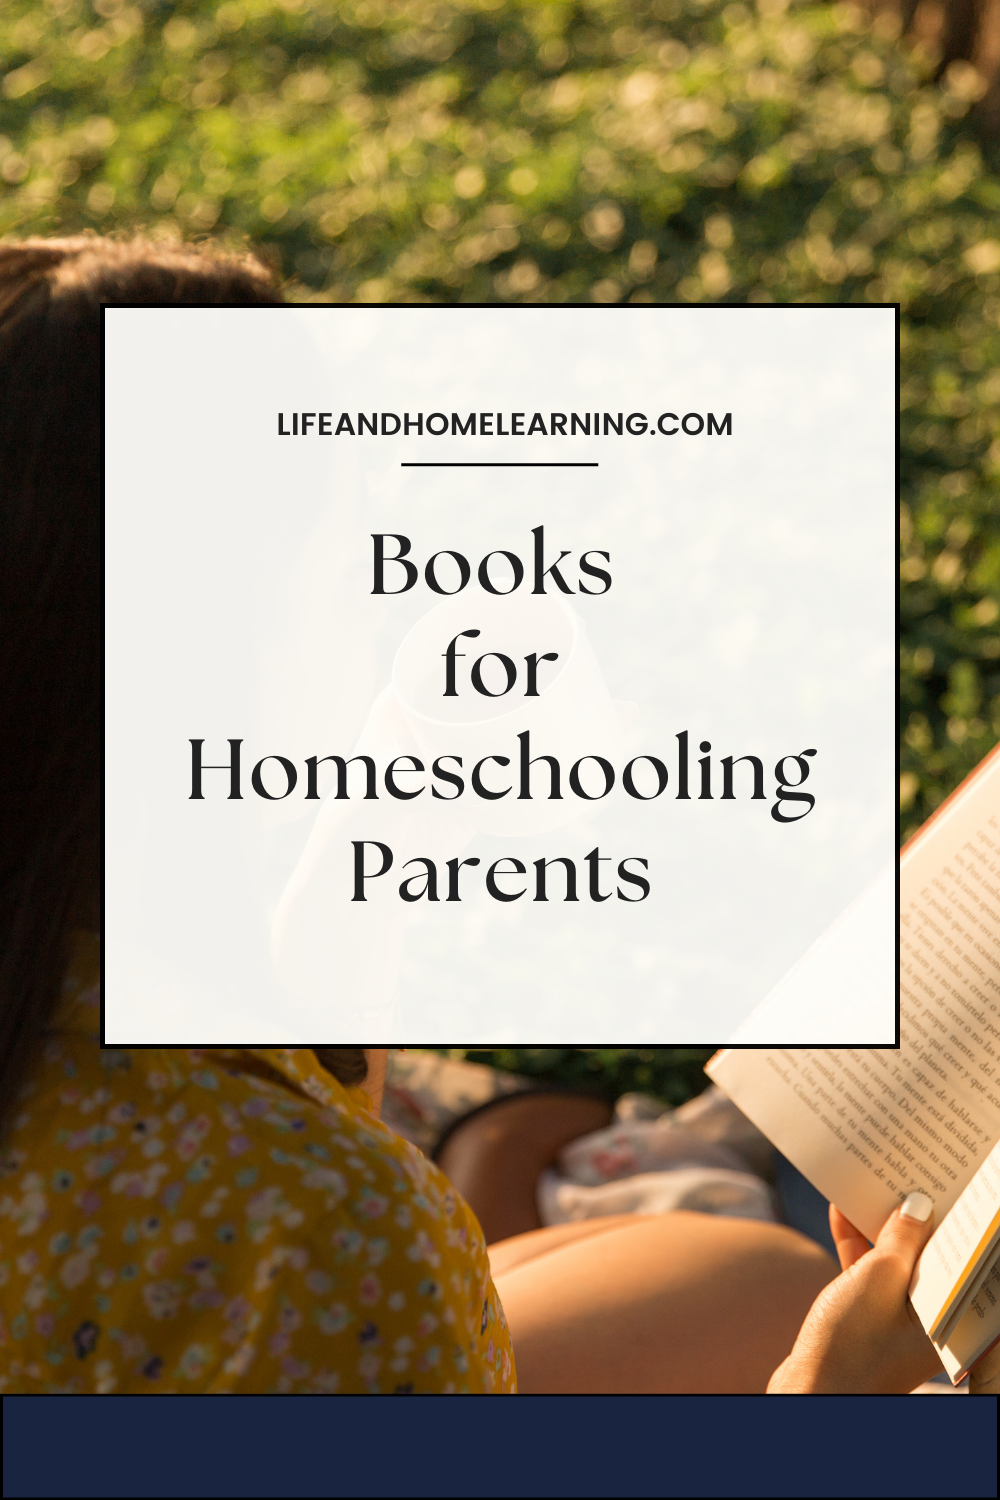 Books for Homeschooling Parents